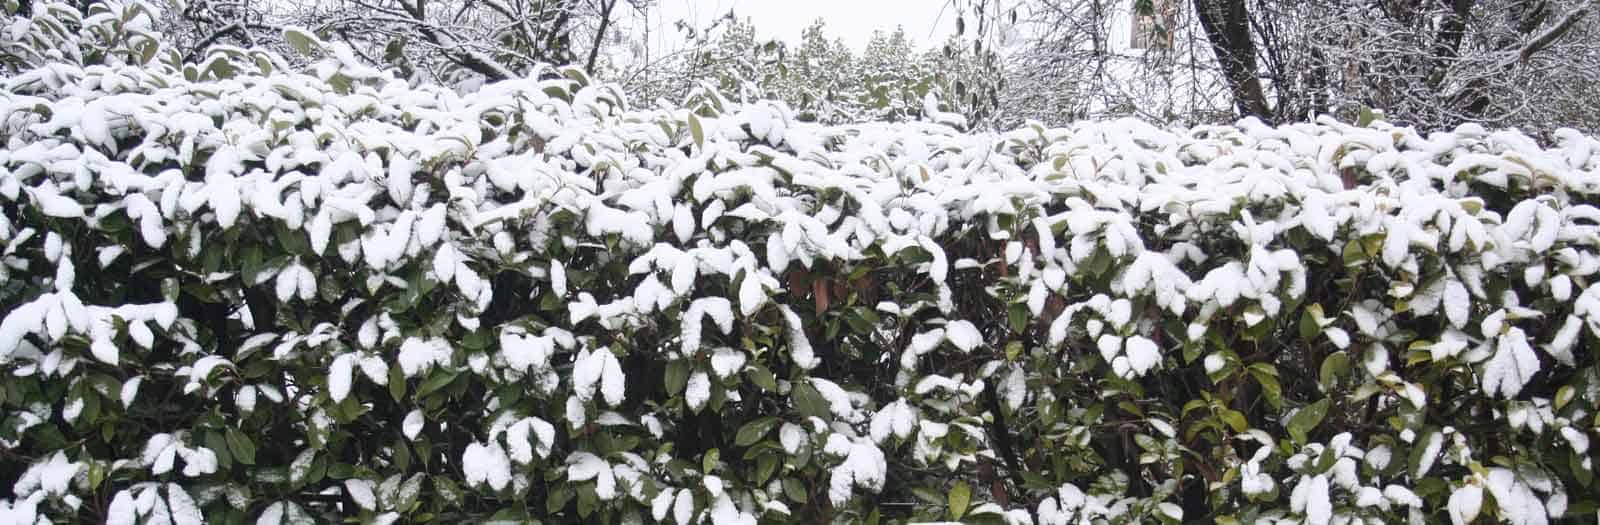 Shrubs-covered-in-snow